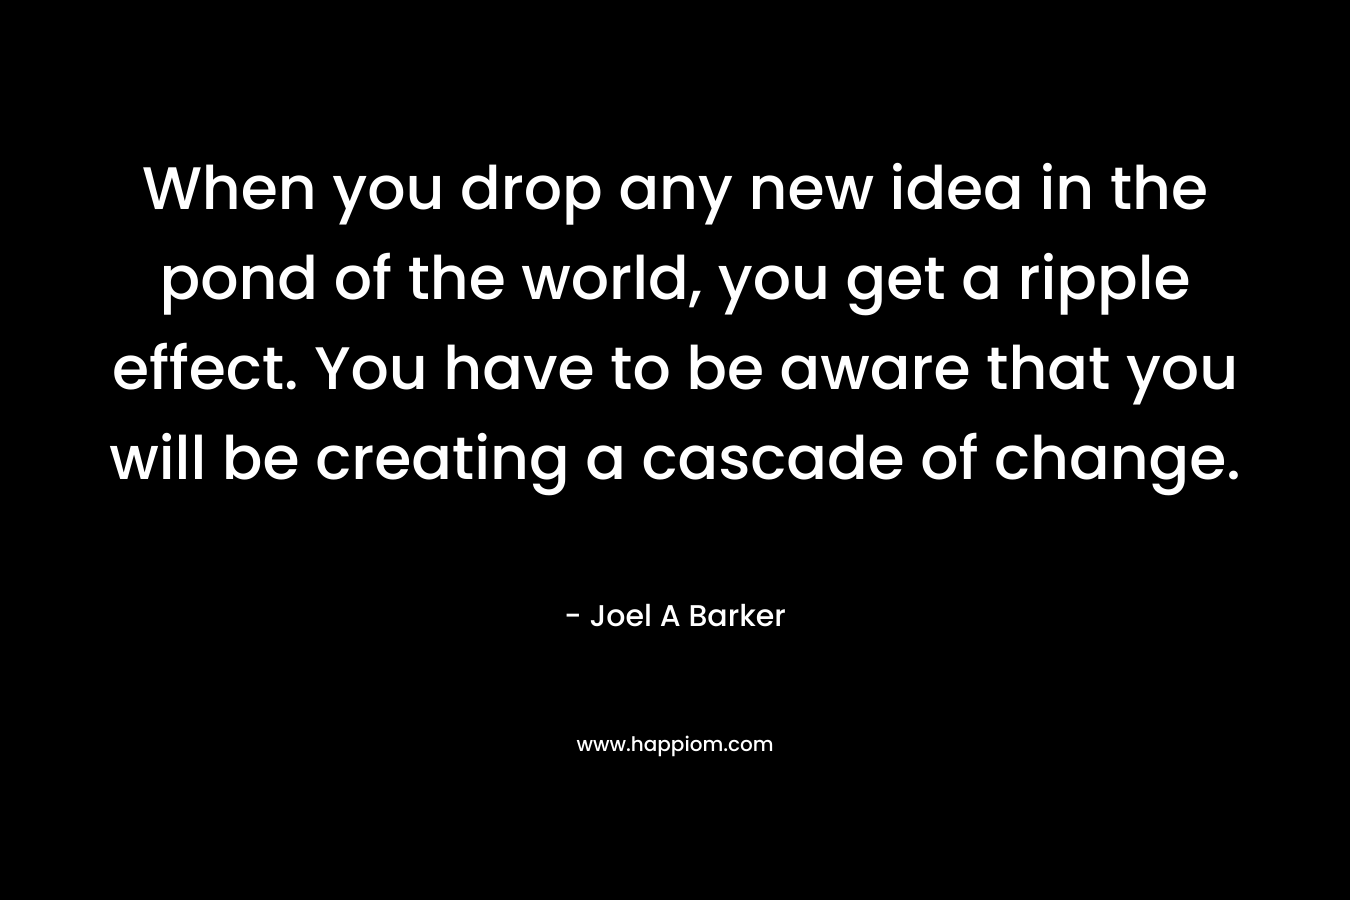 When you drop any new idea in the pond of the world, you get a ripple effect. You have to be aware that you will be creating a cascade of change. – Joel A Barker